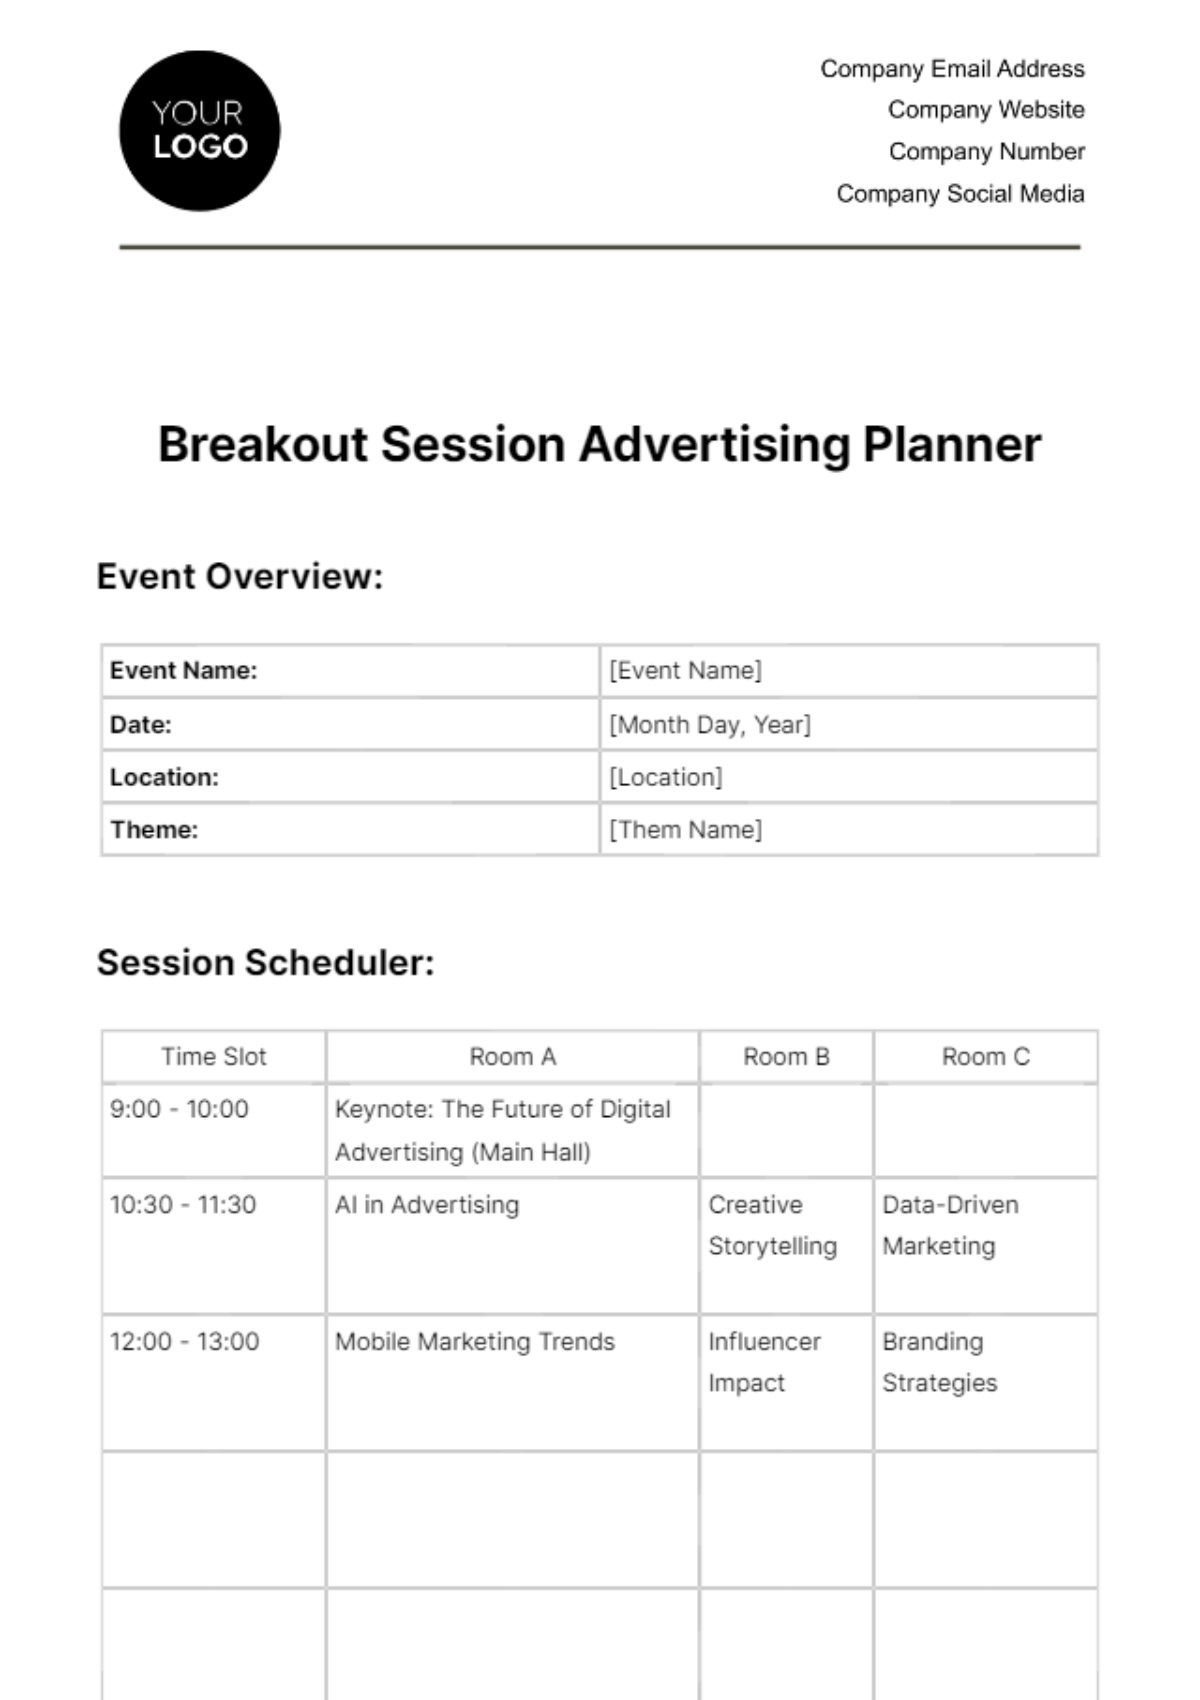 Free Breakout Session Advertising Planner Template